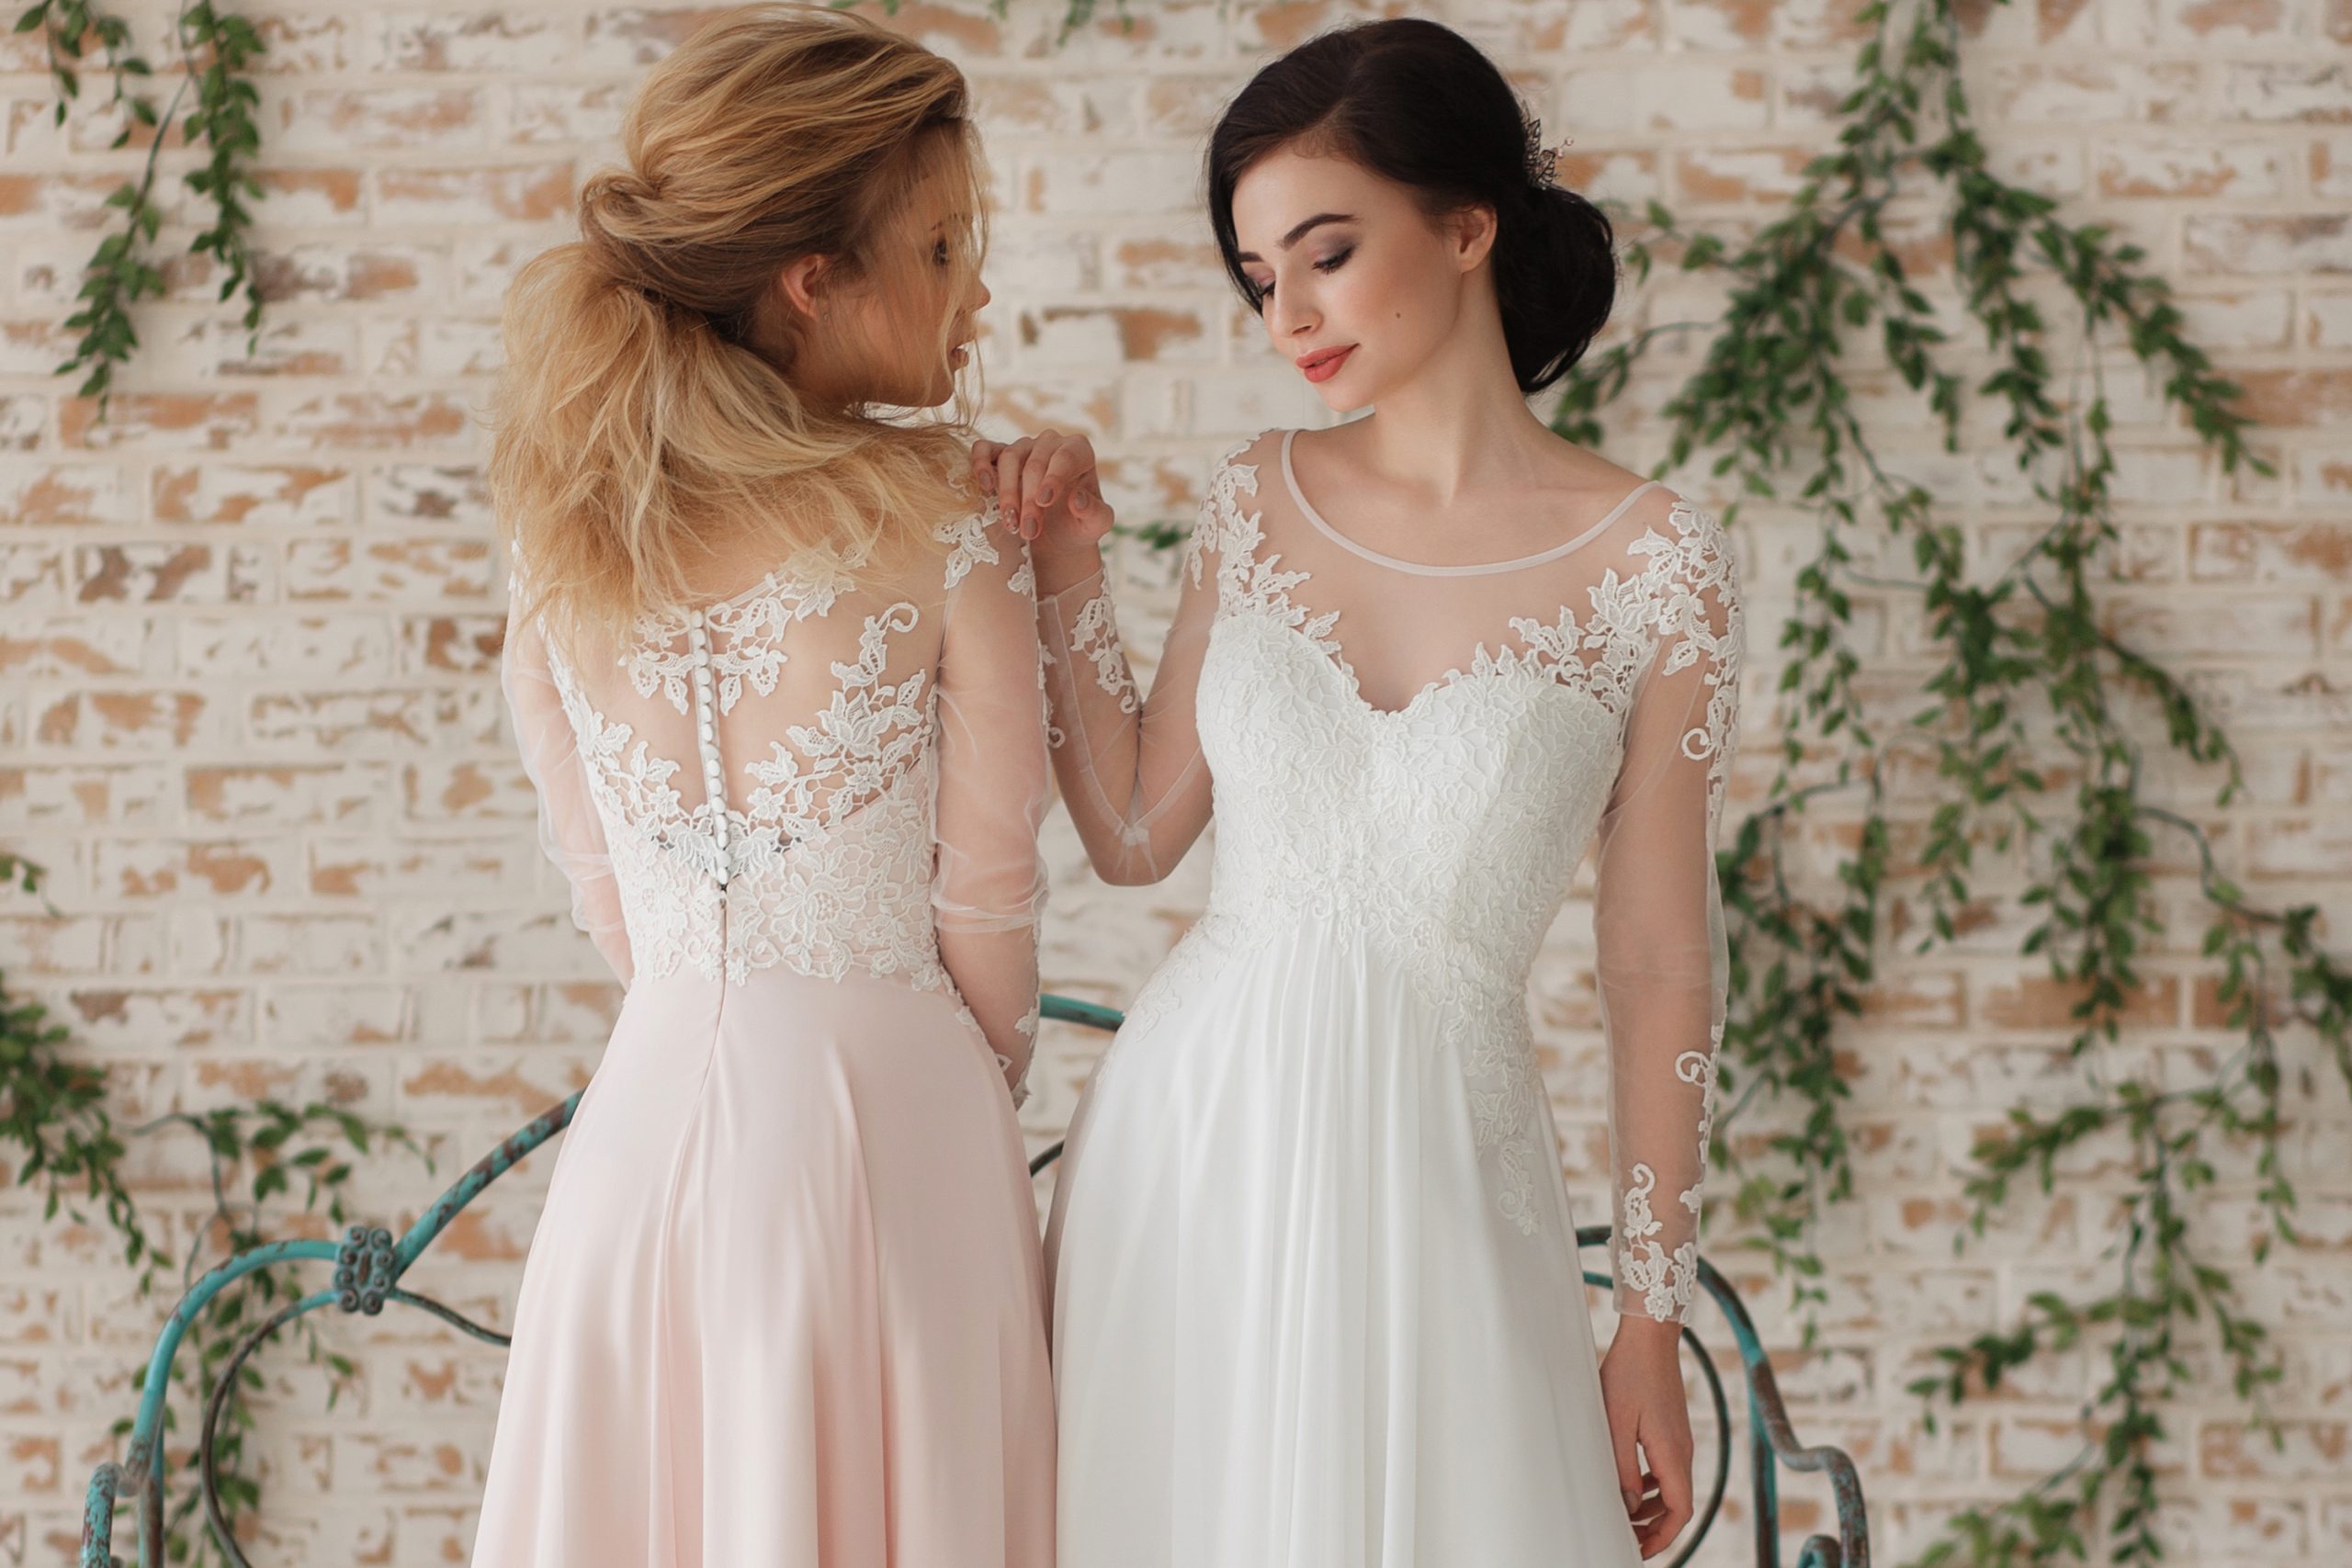 If you are a lesbian getting married, it can be tricky to pick an outfit to wear on your big day. But, these lesbian wedding outfits are perfect for your big day! Plus, two beautiful wedding dresses are better than one, right? 